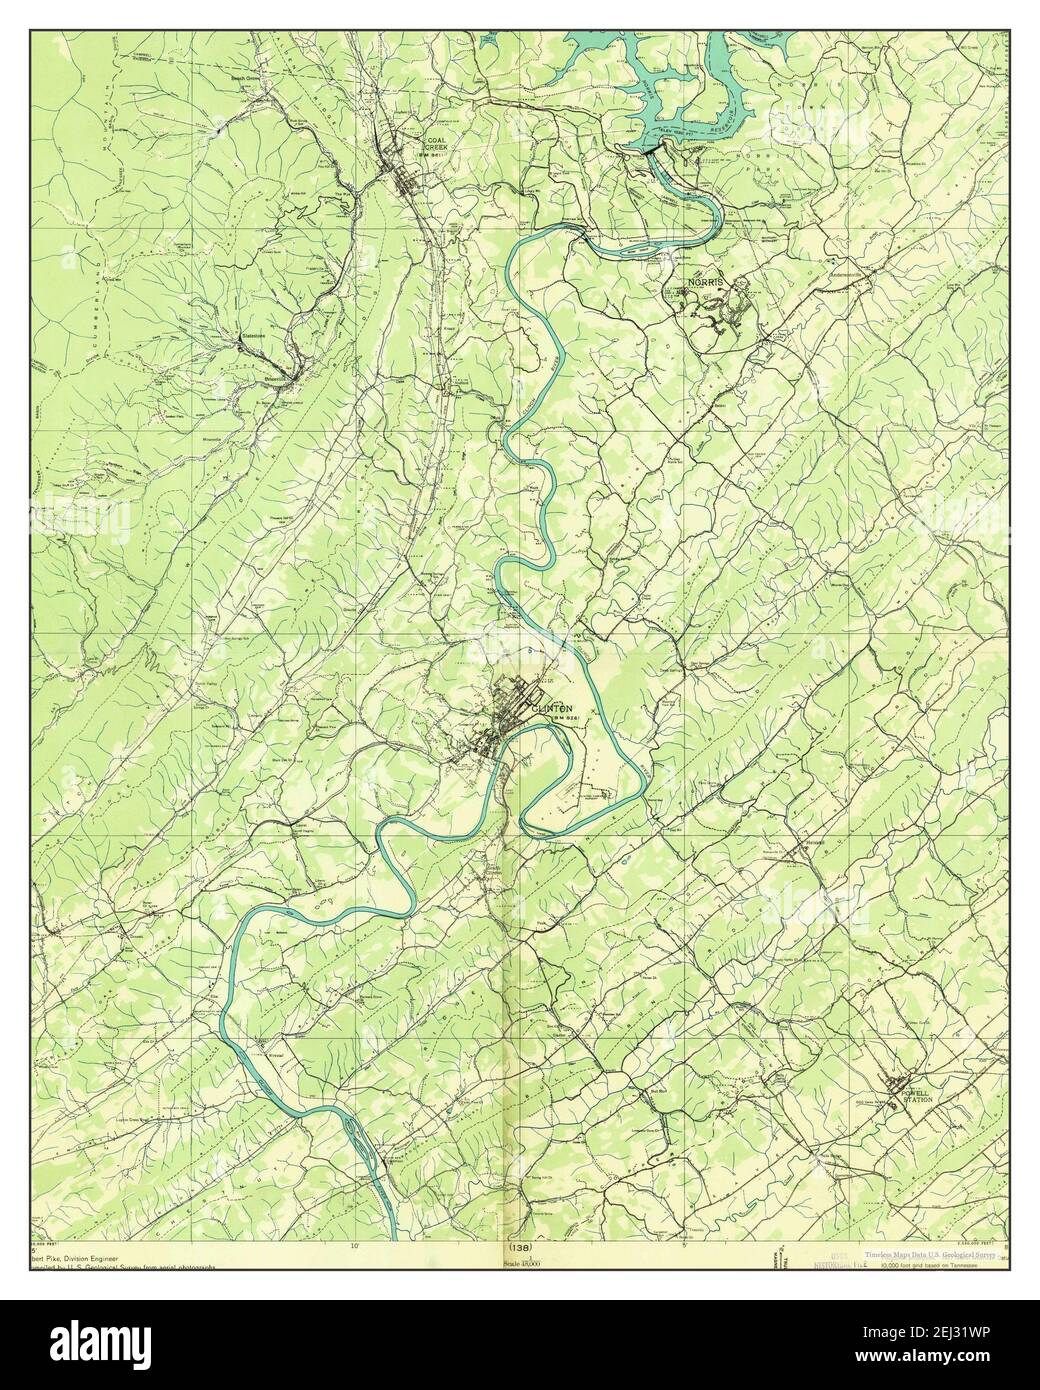 Norris Dam, Tennessee, map 1936, 1:48000, United States of America by Timeless Maps, data U.S. Geological Survey Stock Photo